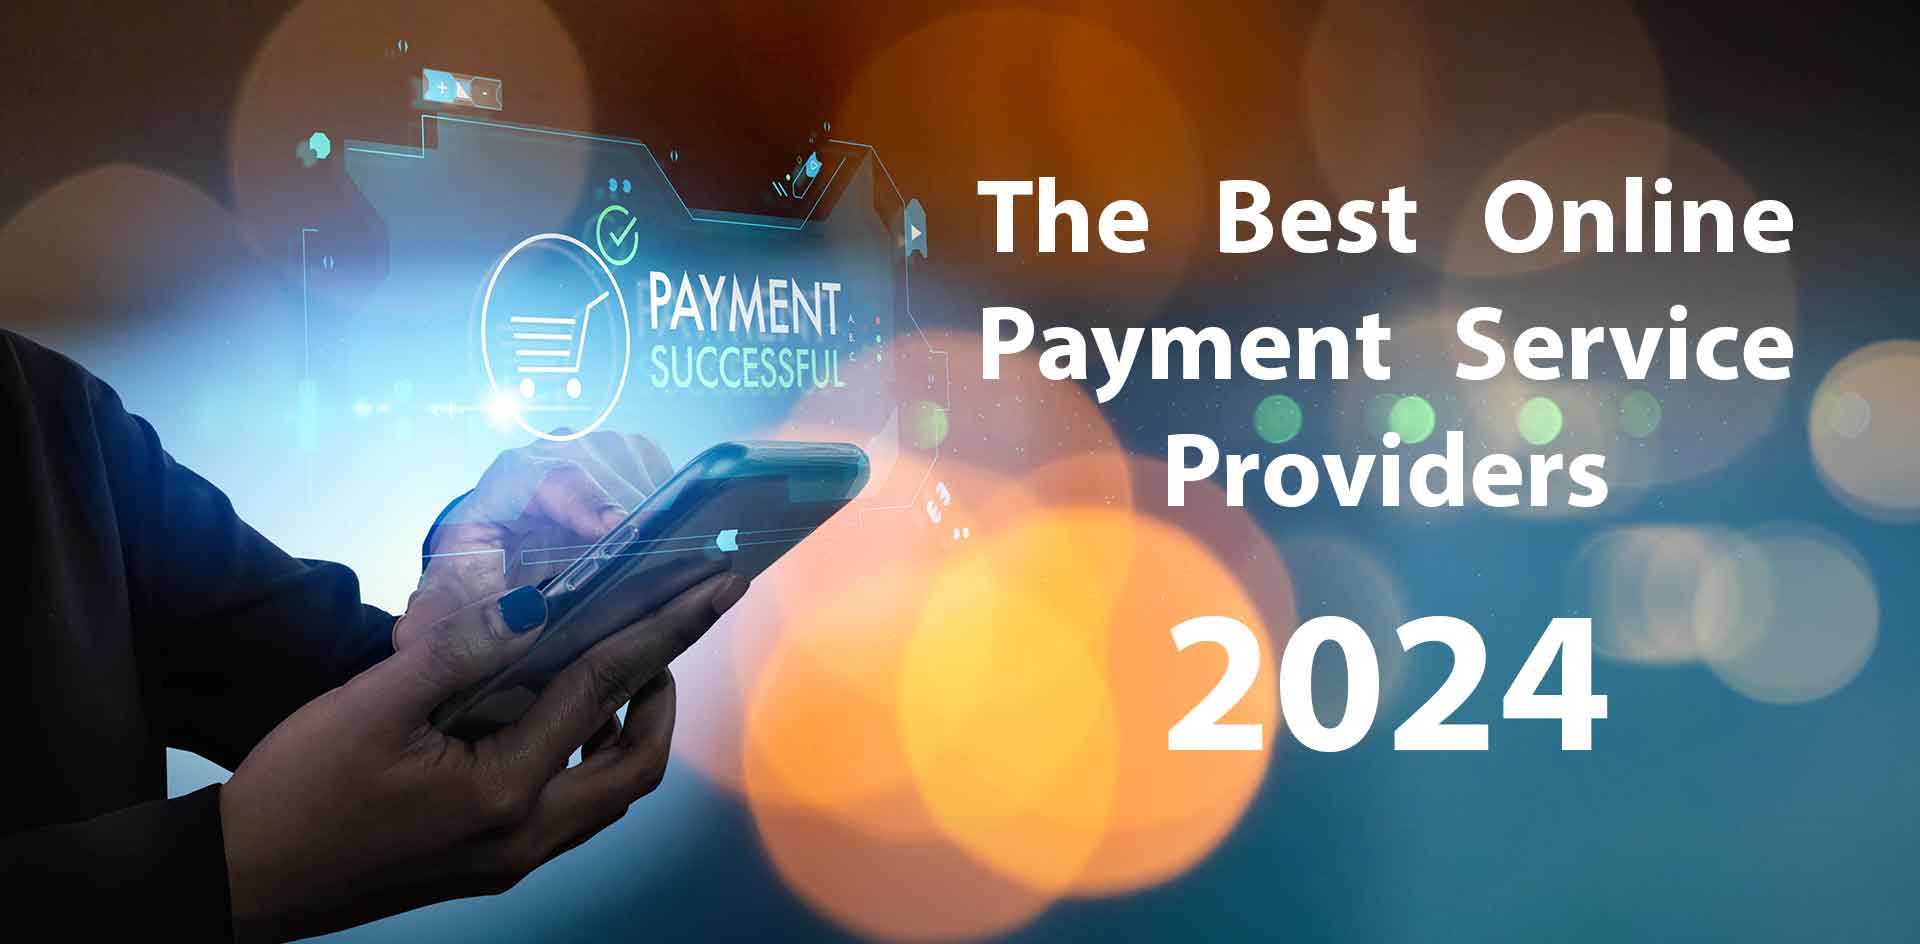 The Best Online Payment Service Providers 2024